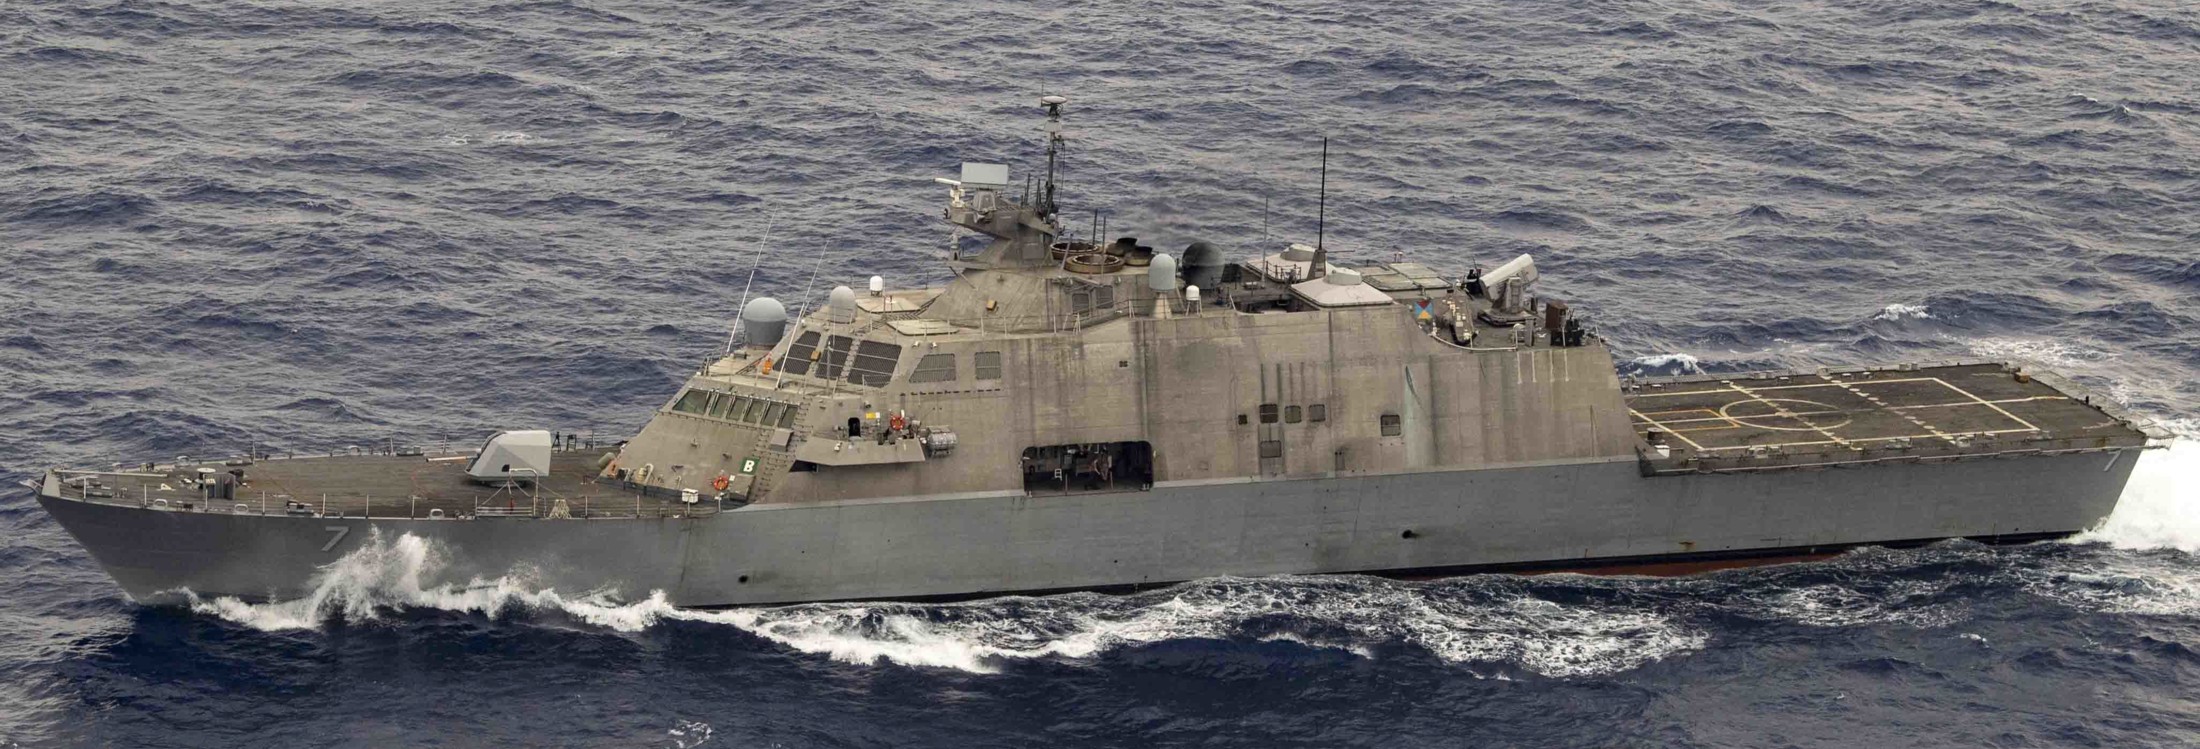 lcs-7 uss detroit freedom class littoral combat ship us navy 44